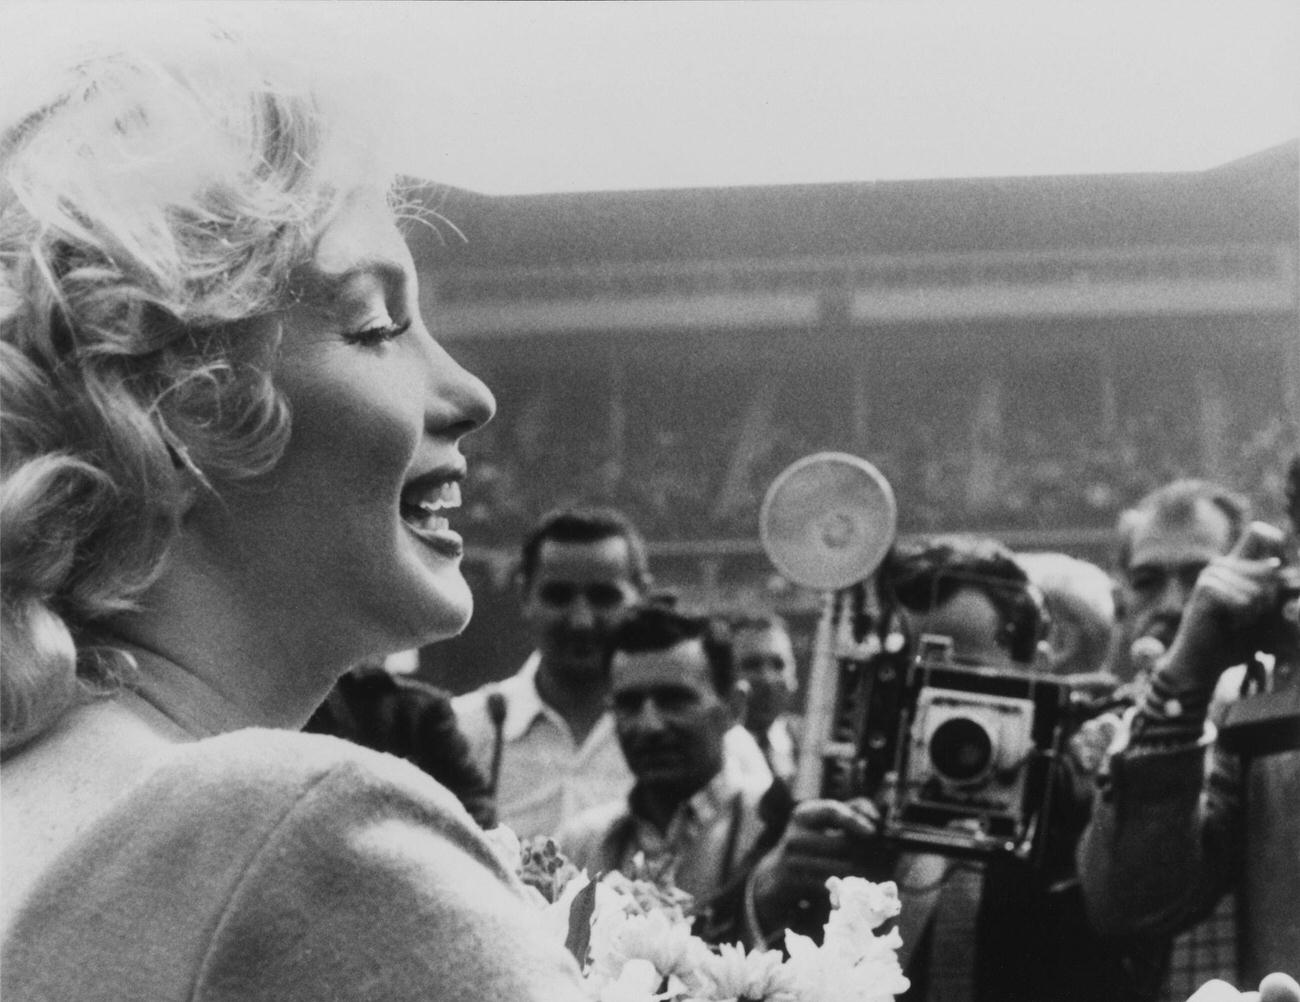 Marilyn Monroe At Soccer Match Ceremony At Ebbets Field, 1957